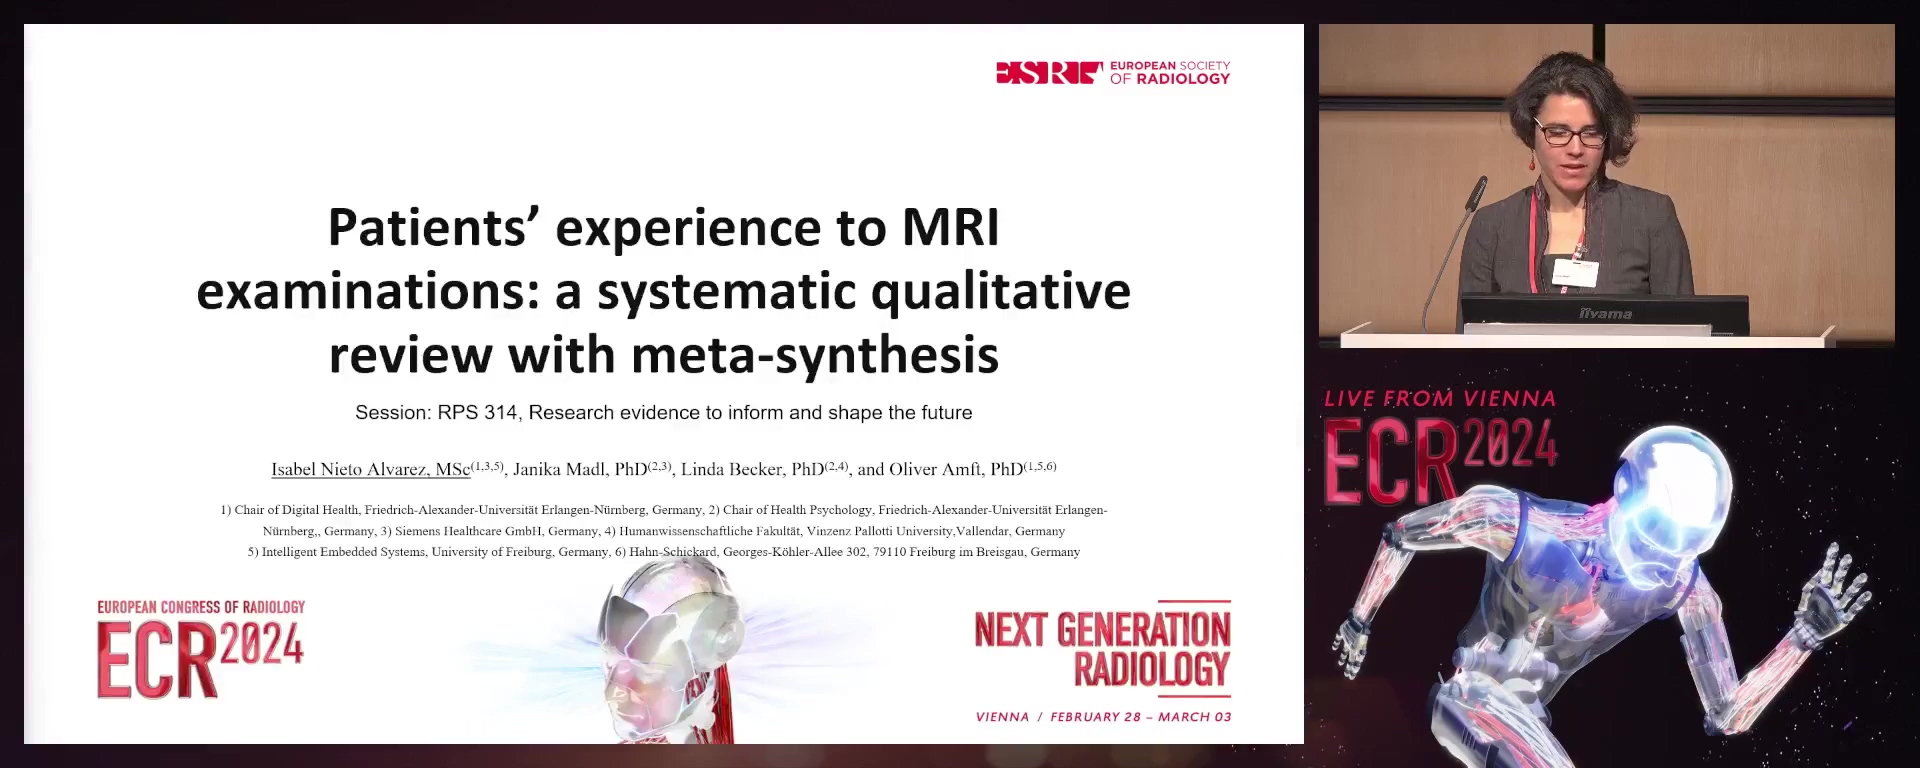 Patients’ experience to MRI examinations: a systematic qualitative review with metasynthesis